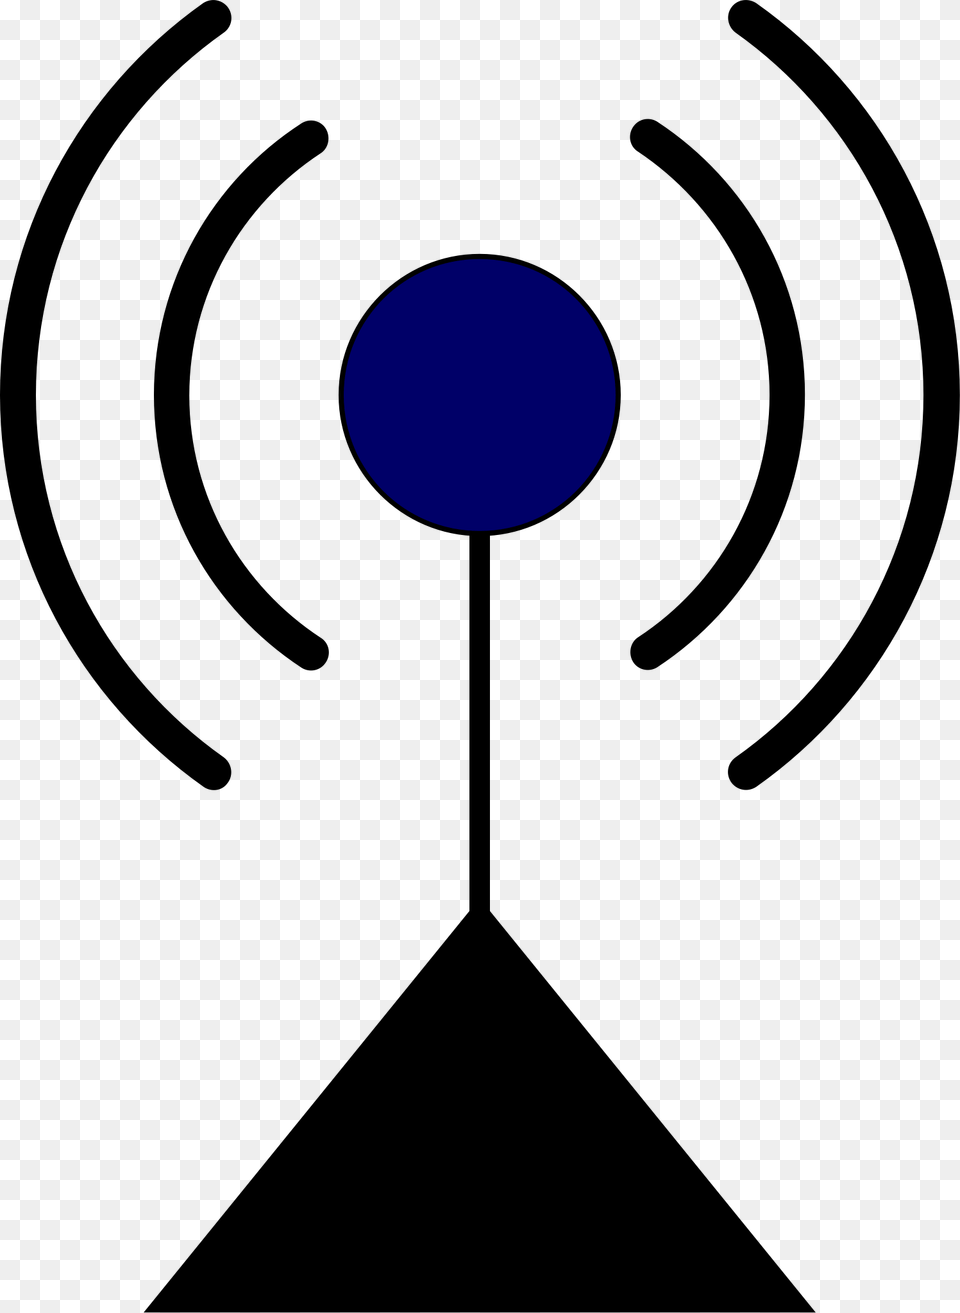 Wlan Access Point Symbol Icons, Lighting, Sphere, Astronomy, Moon Free Png